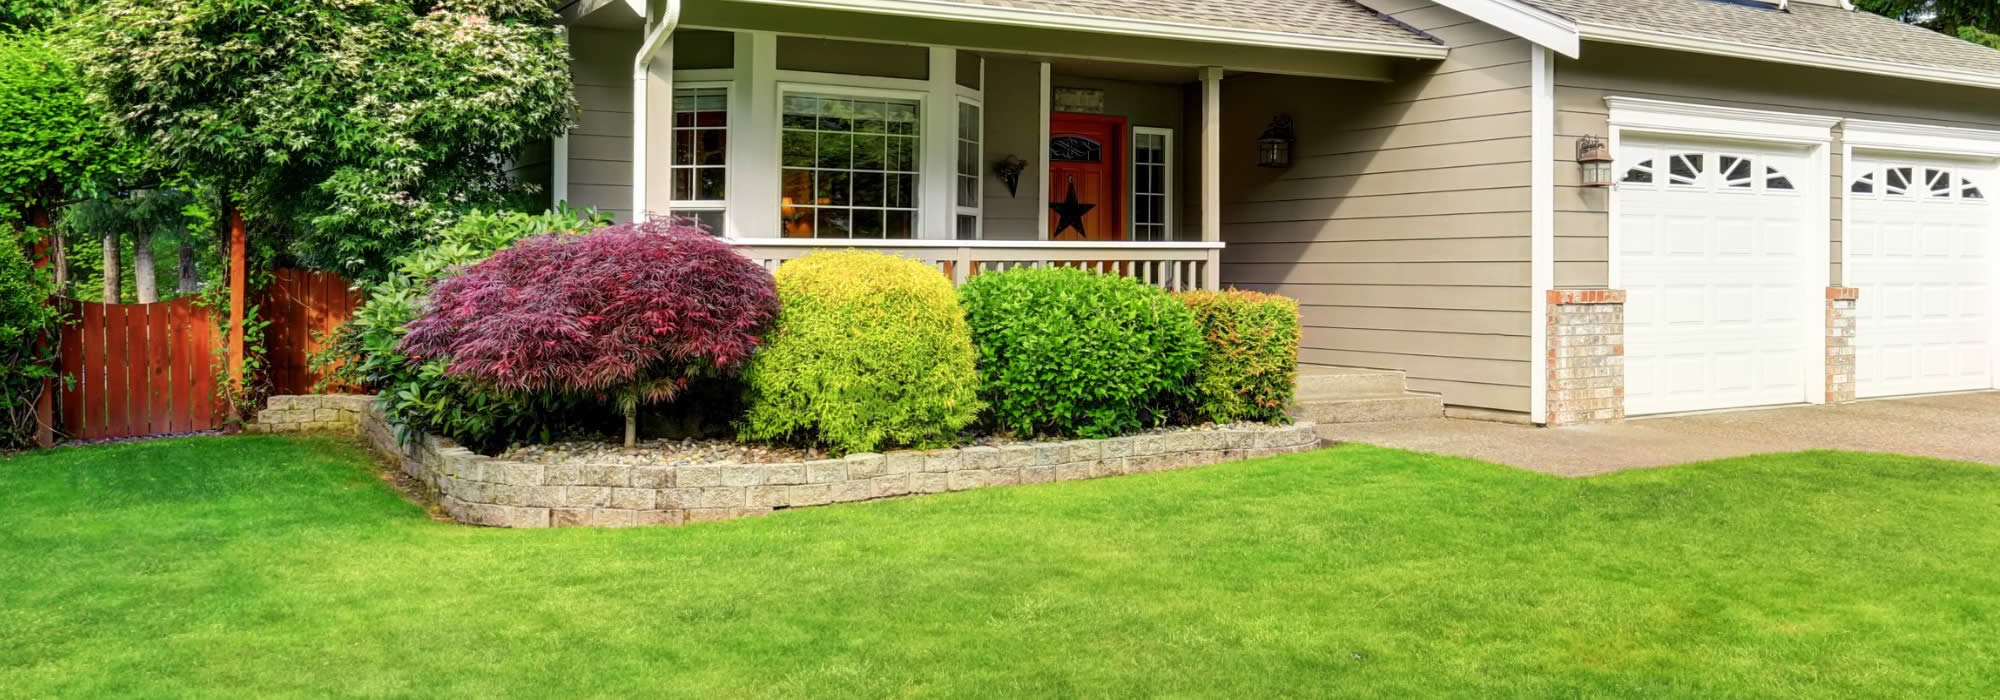 Landscaping Services in DeForest